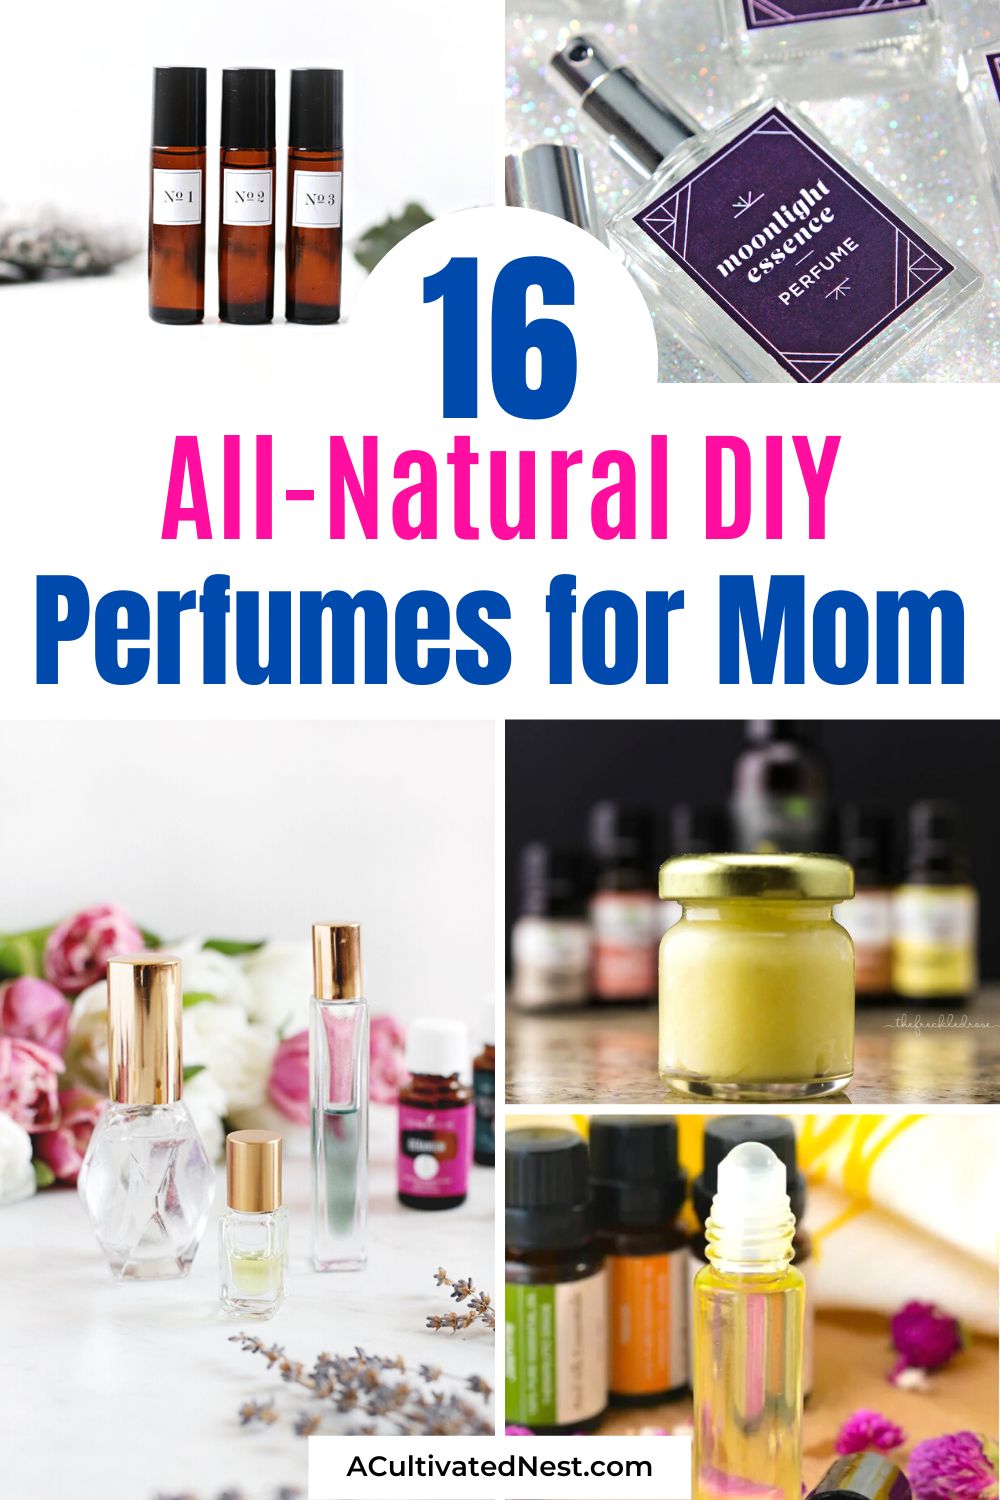  16 Delightful All-Natural DIY Perfumes for Mom- Looking for a thoughtful gift for Mom that's budget-friendly? Check out these all-natural DIY perfume recipes! There's a scent for every mom out there! | Mother's Day gift ideas, how to make perfume, #DIYPerfume #diyGifts #mothersDay #DIY #ACultivatedNest